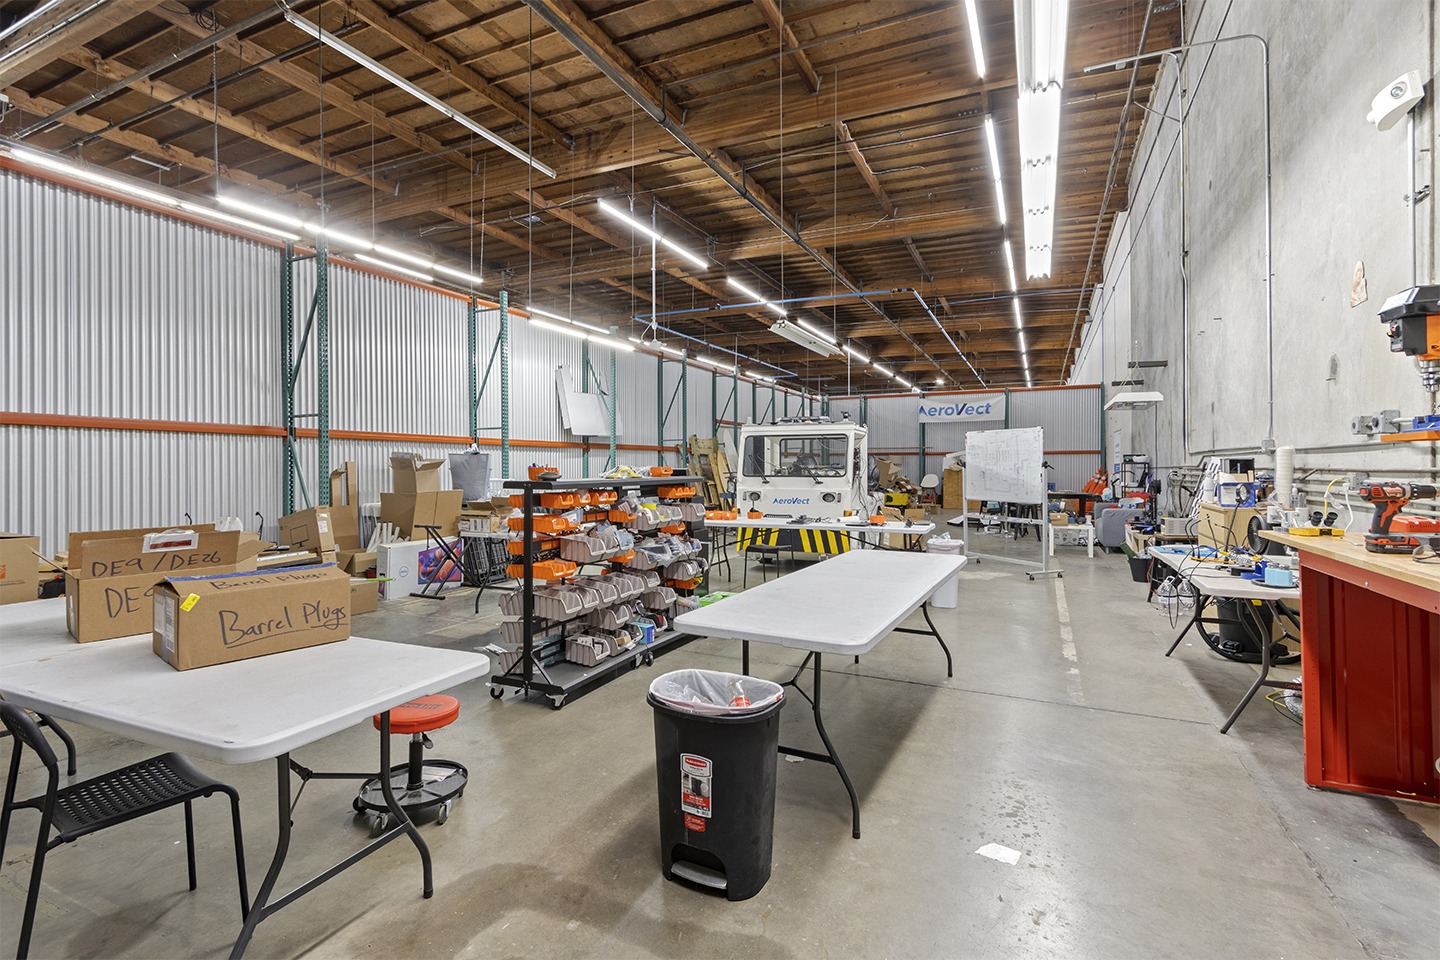 Landover warehouse space for a small business